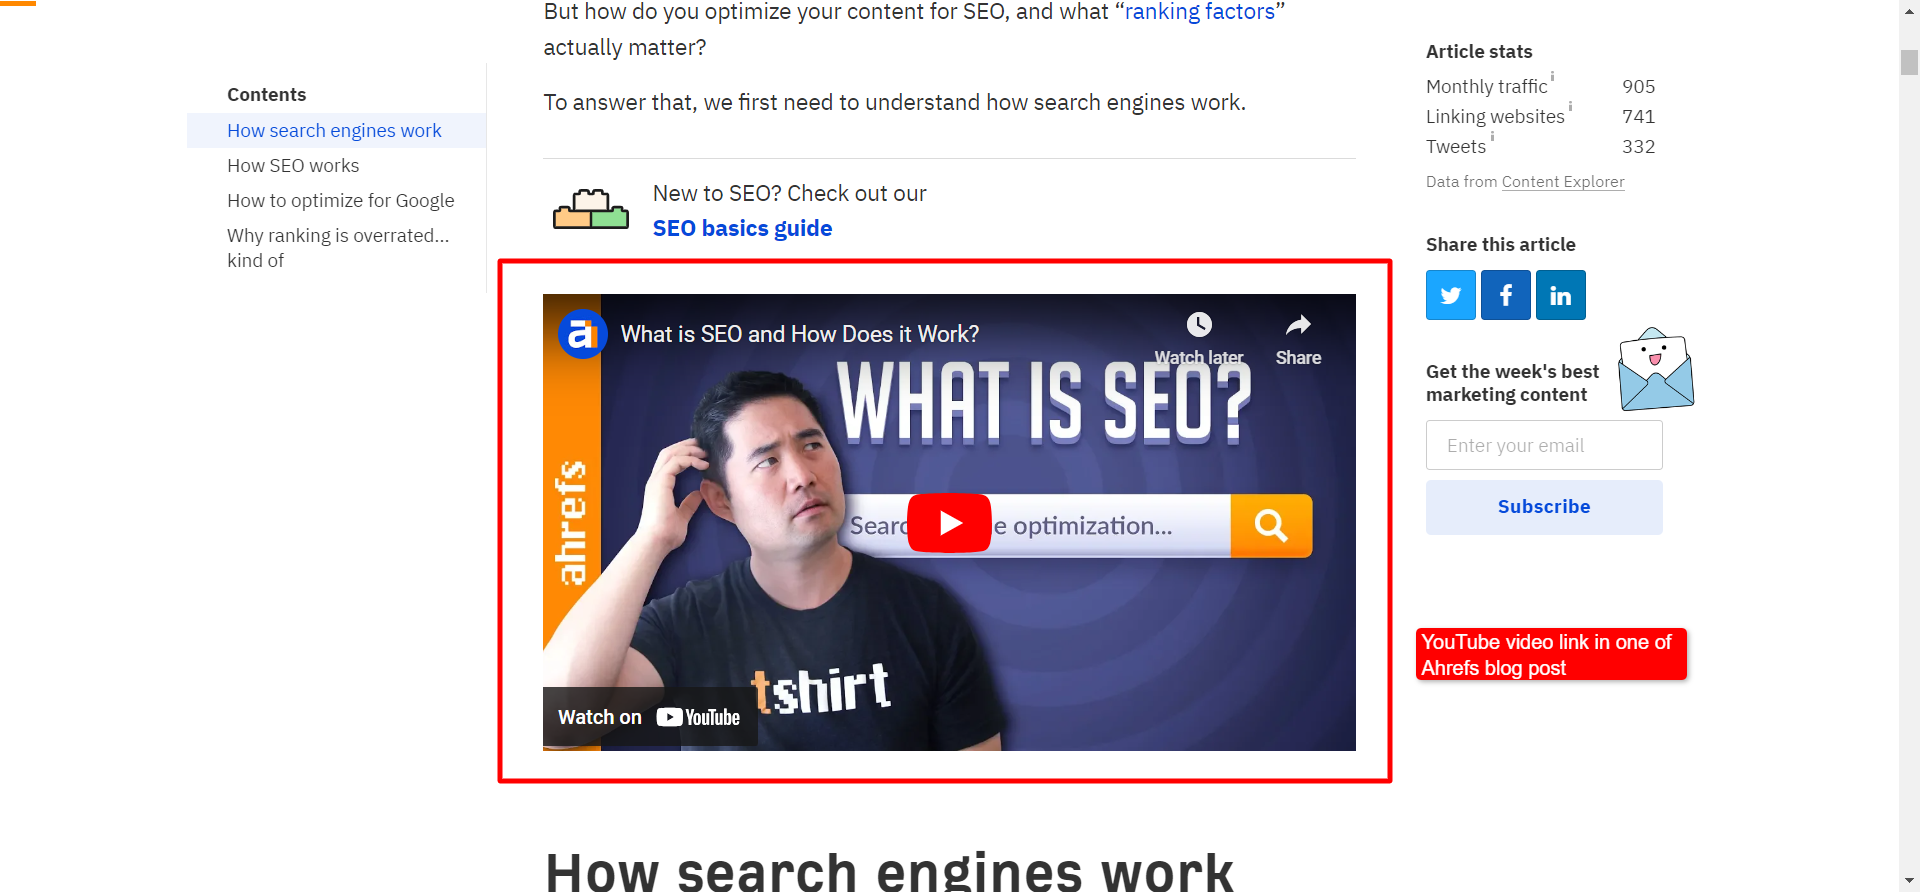 YouTube video on 'What is SEO' linked in Ahrefs blog post.